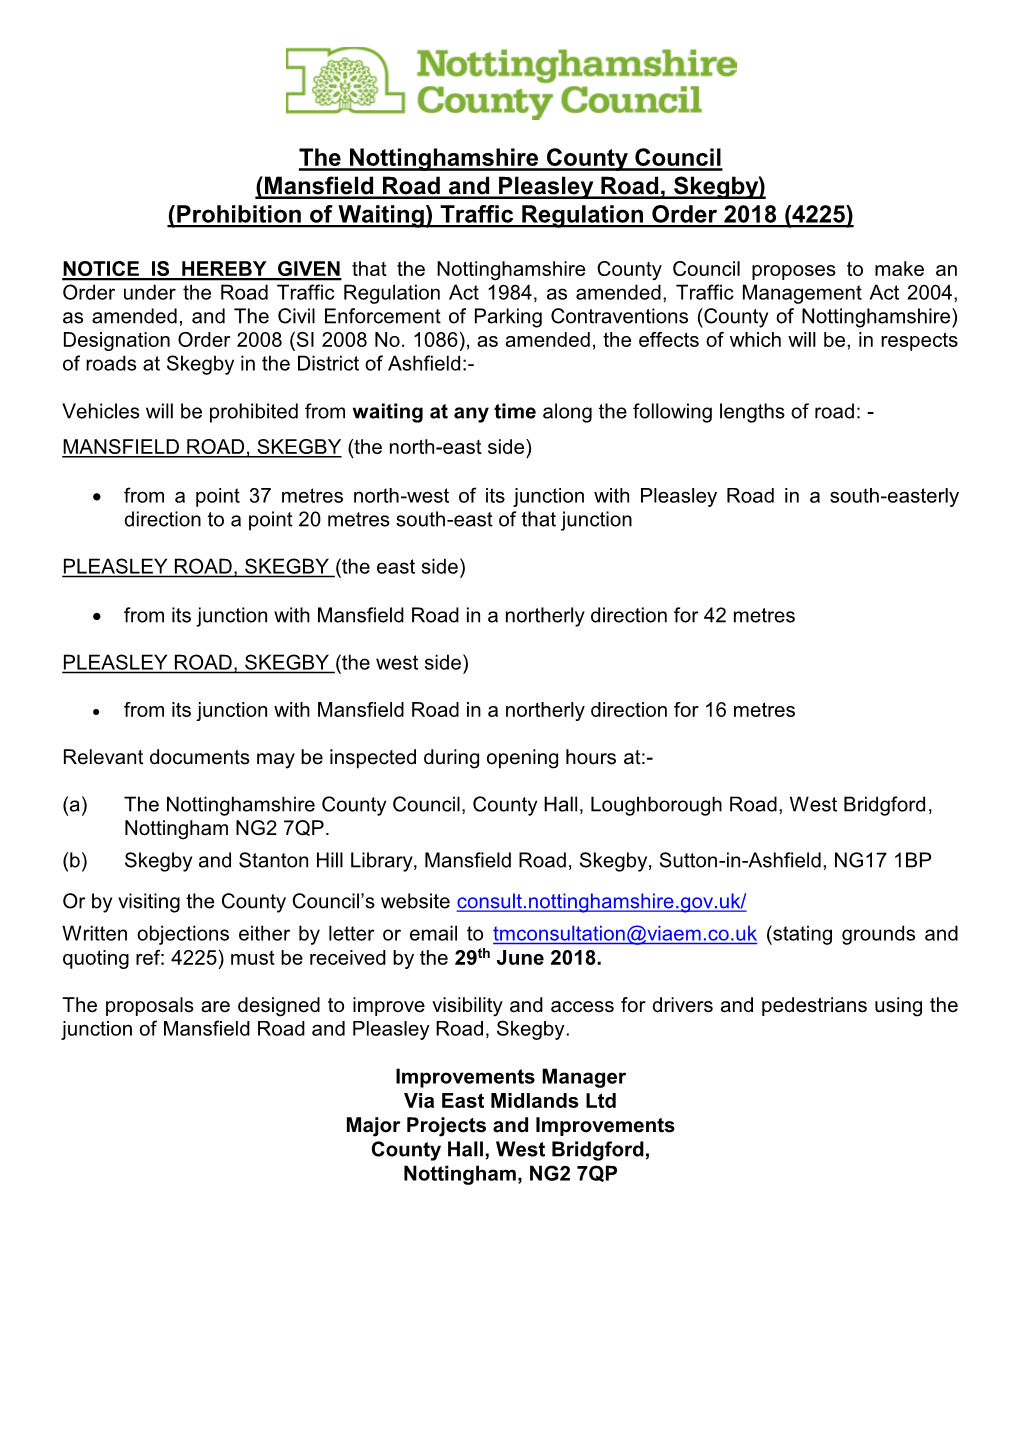 Mansfield Road and Pleasley Road, Skegby) (Prohibition of Waiting) Traffic Regulation Order 2018 (4225)